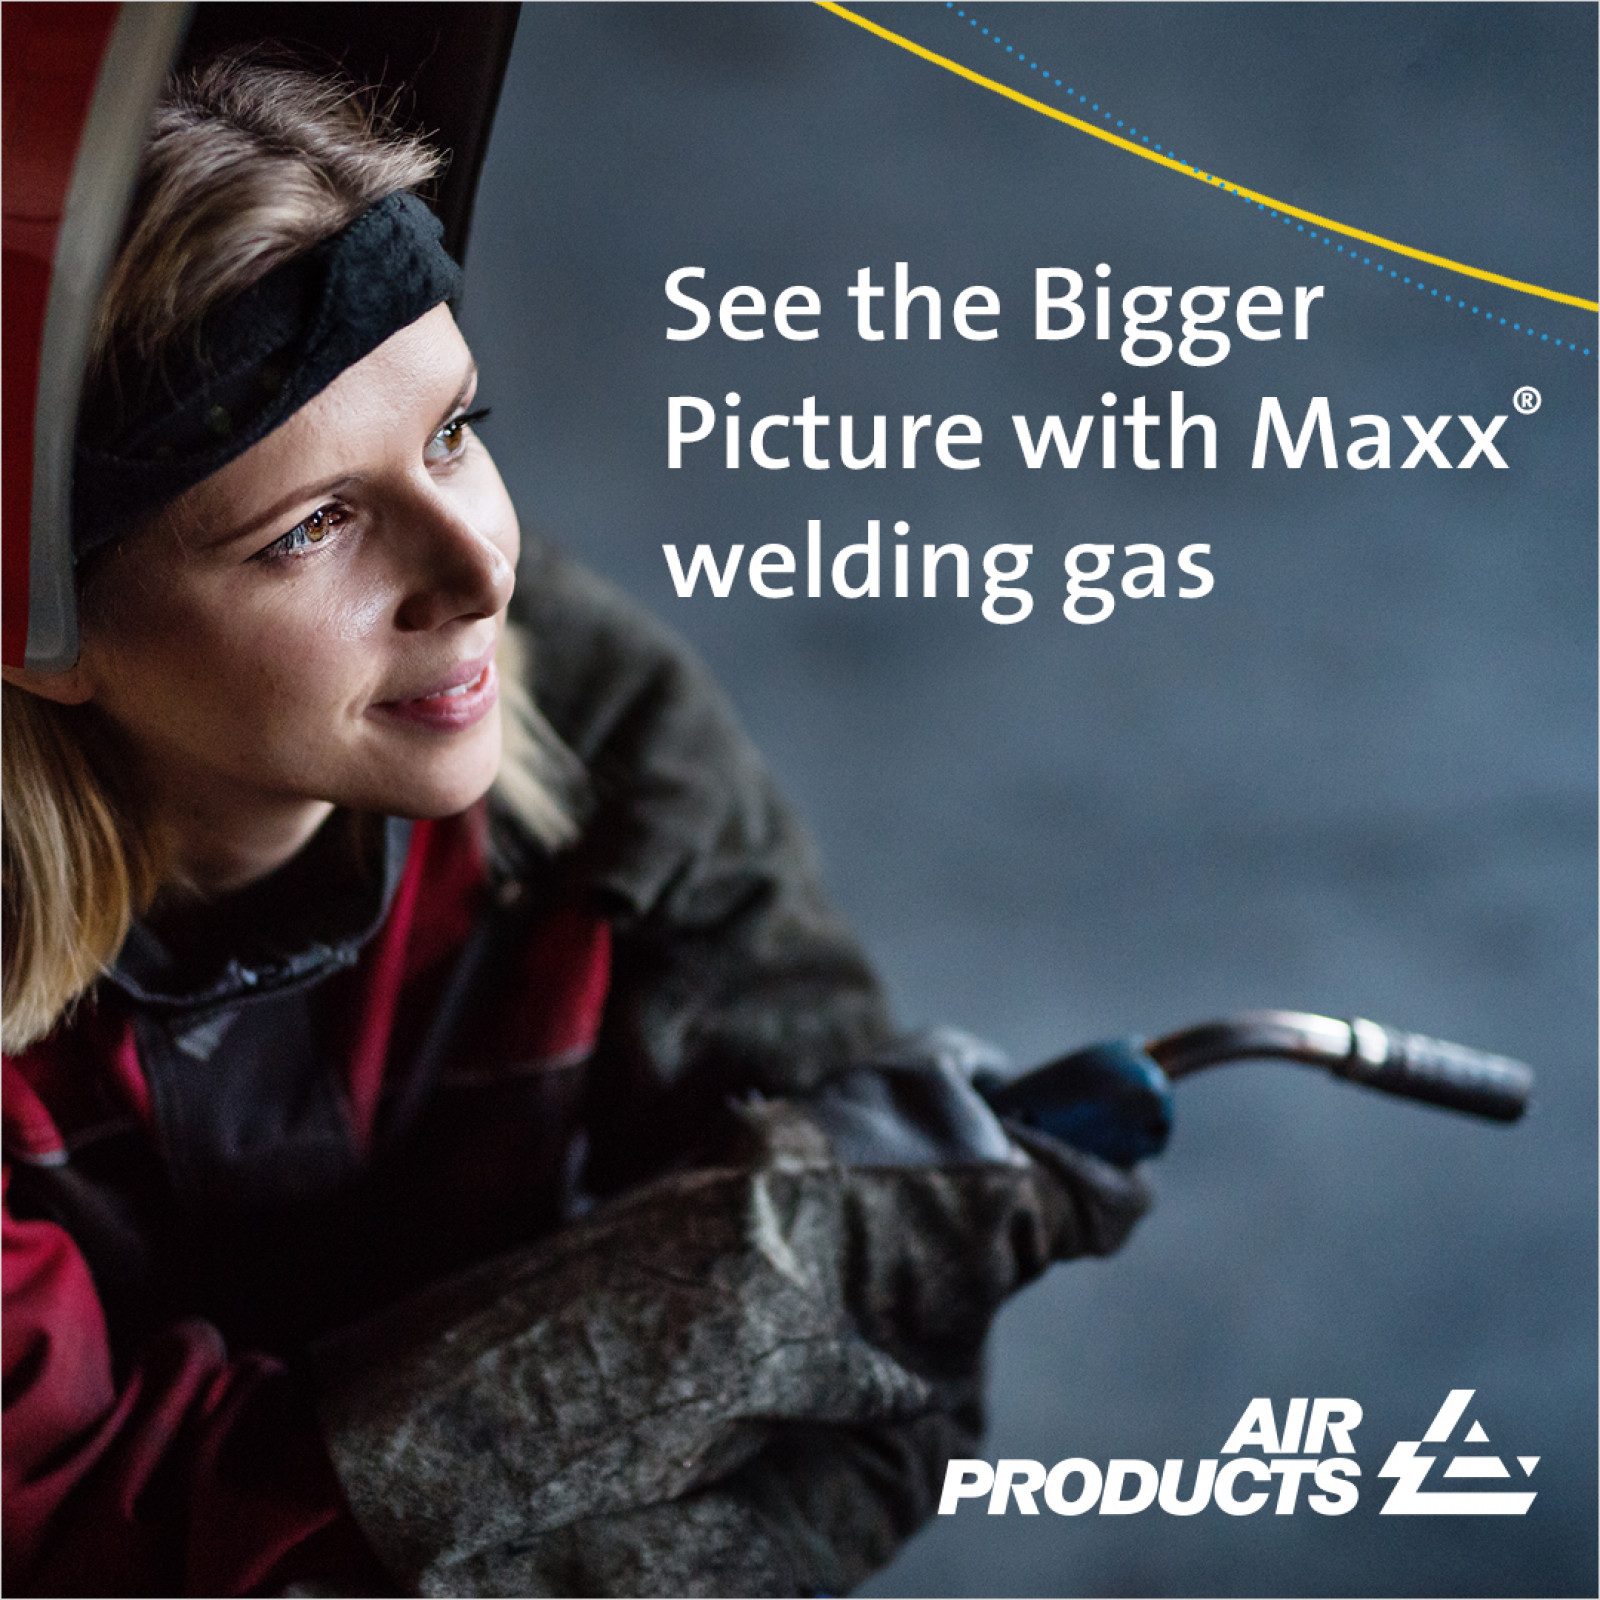 New look for Air Products’ Maxx® weld process gas...